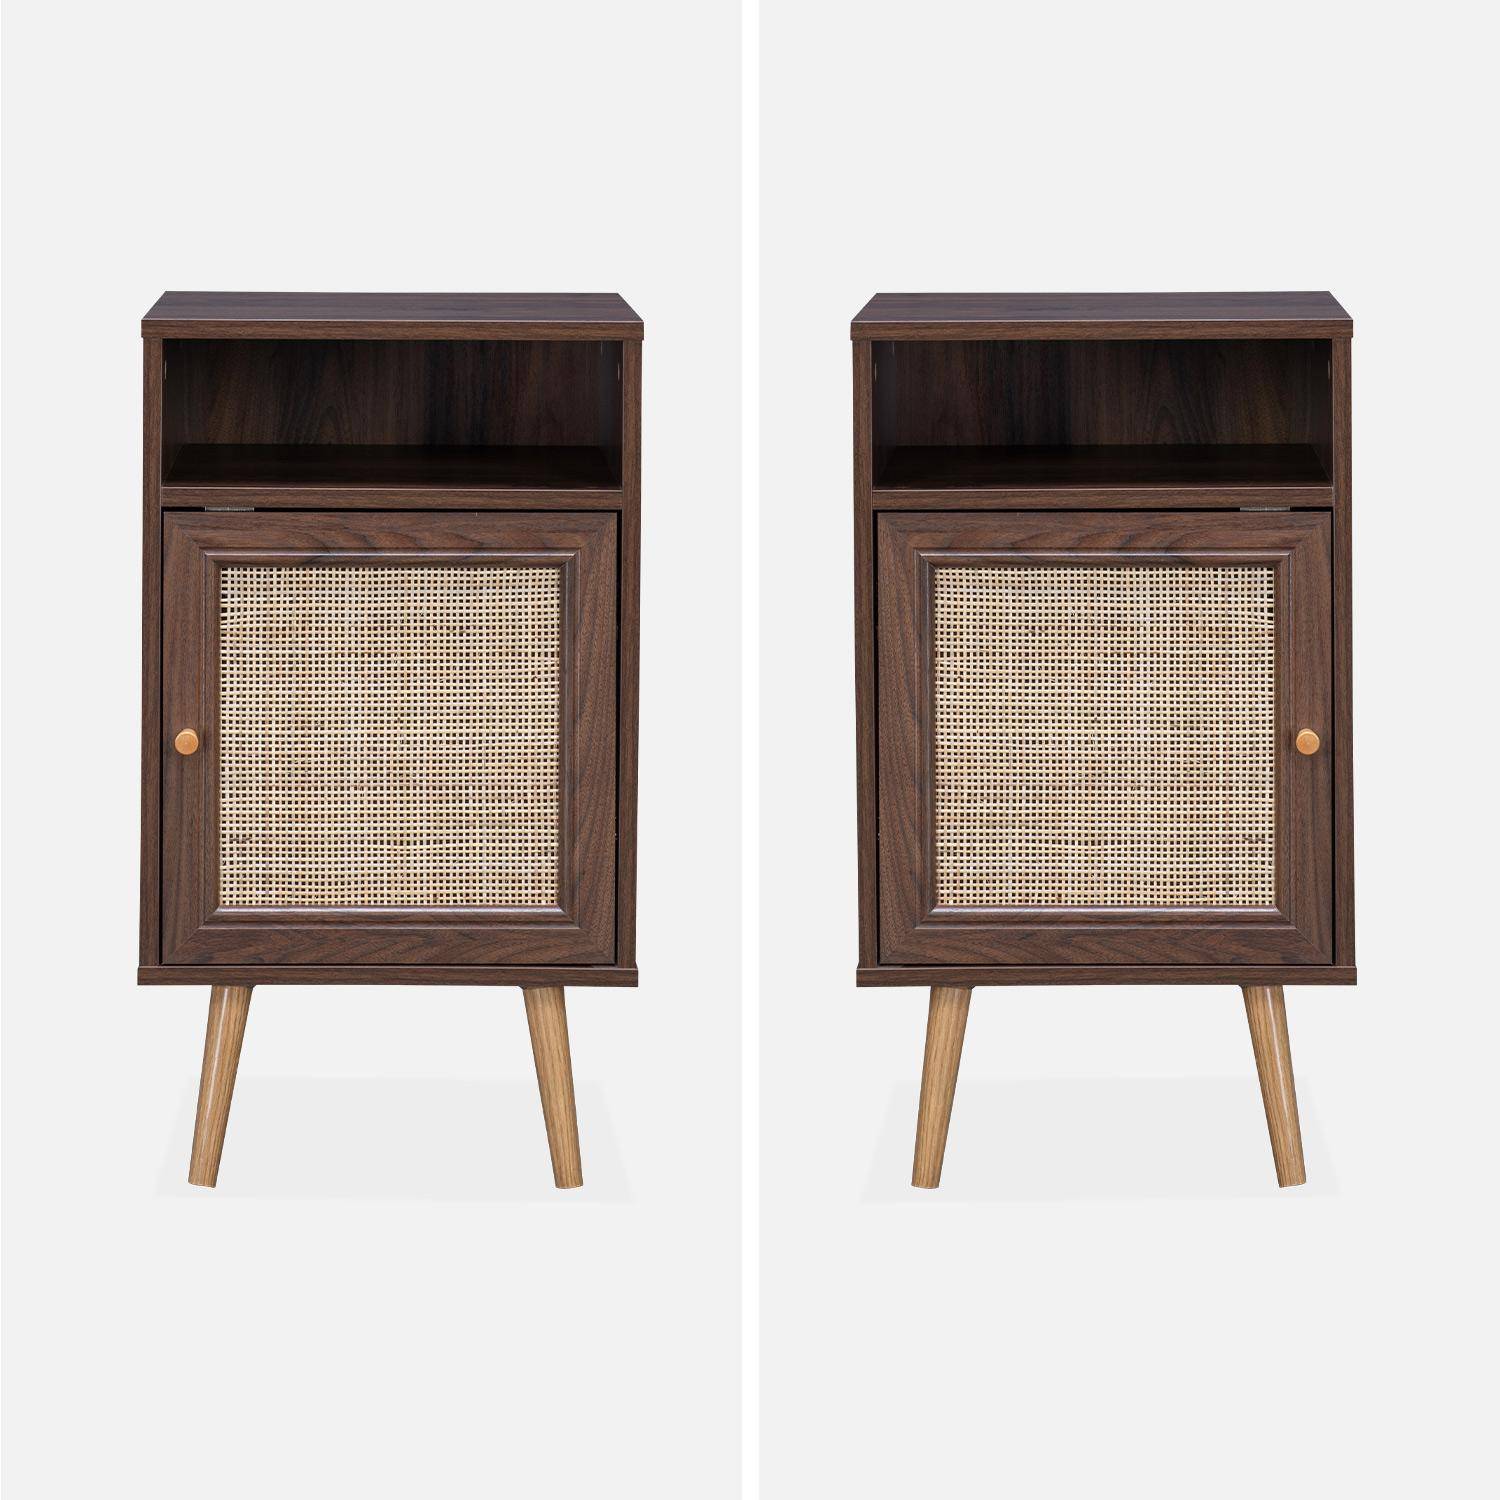 Scandi-style wood and cane rattan bedside table with cupboard, 40x39x70cm - Boheme - Dark Wood colour Photo3